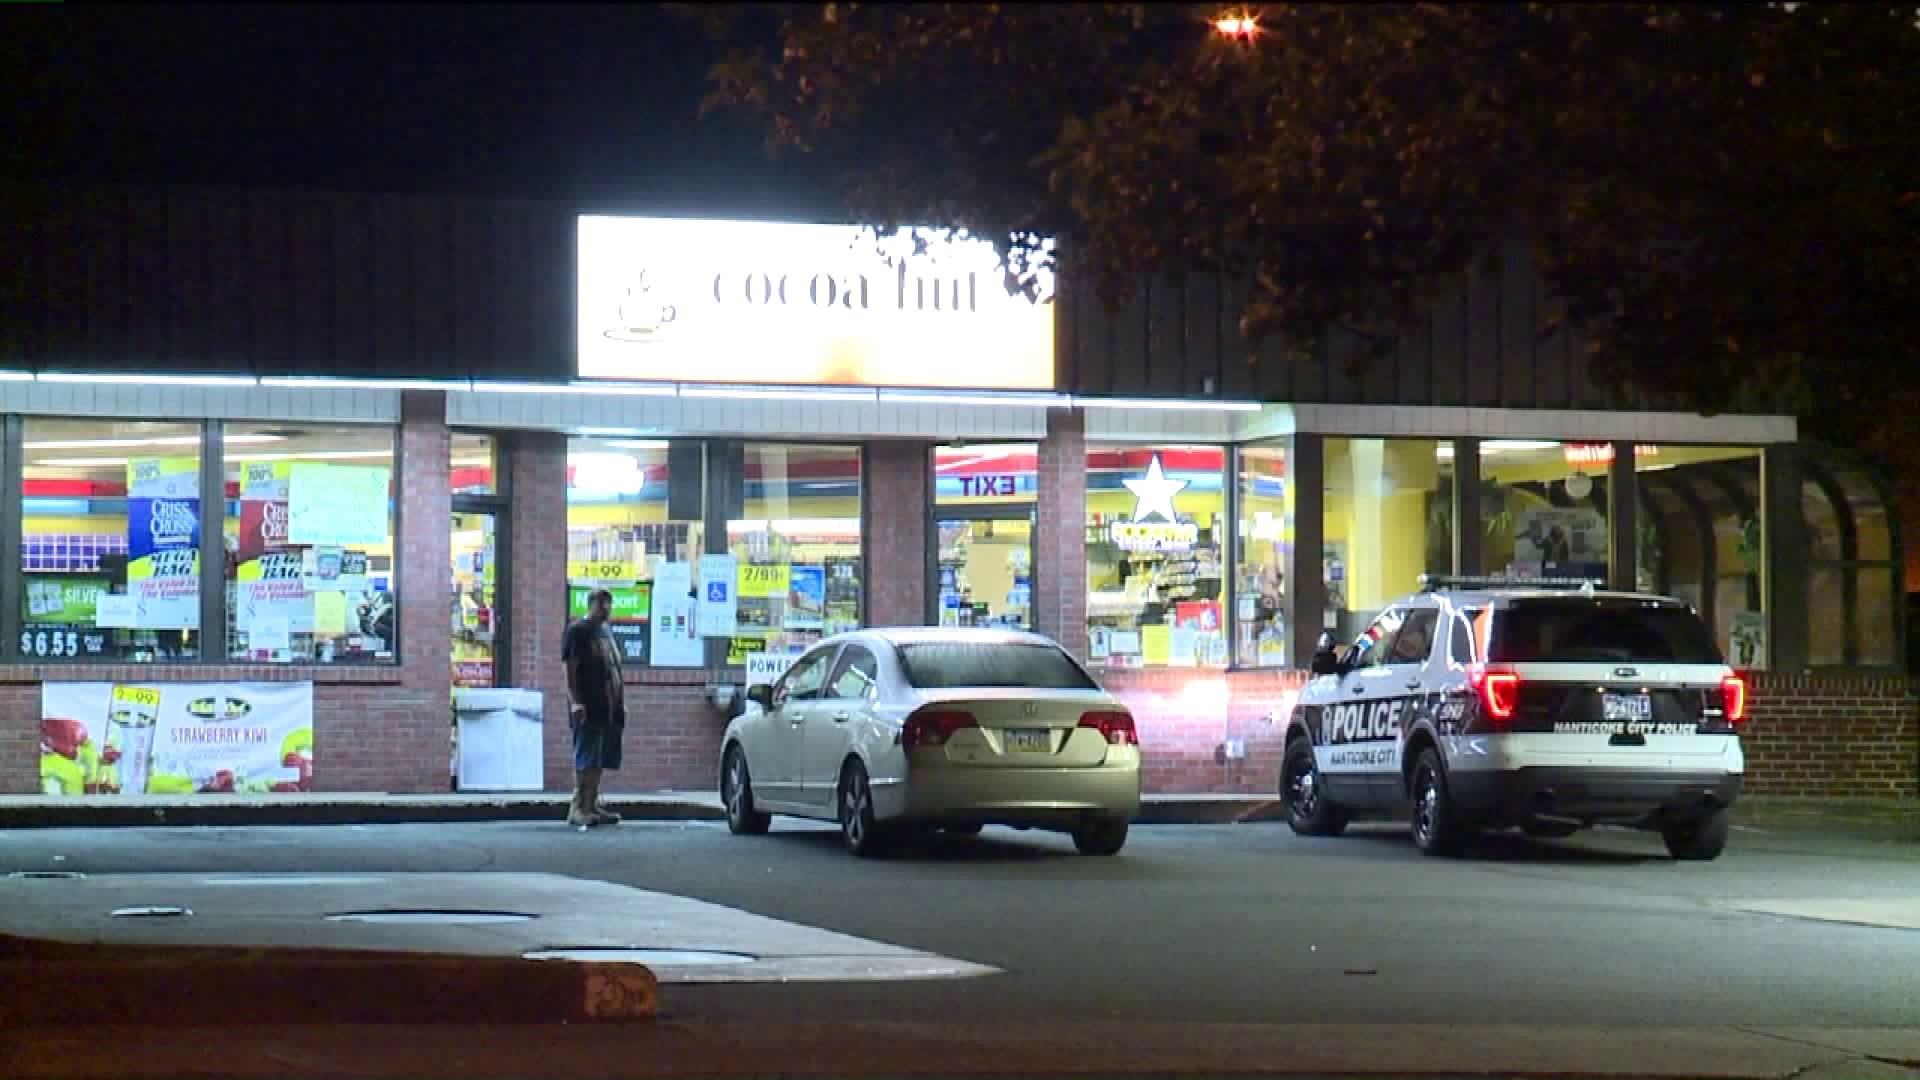 Armed Robbery at Convenience Store in Nanticoke